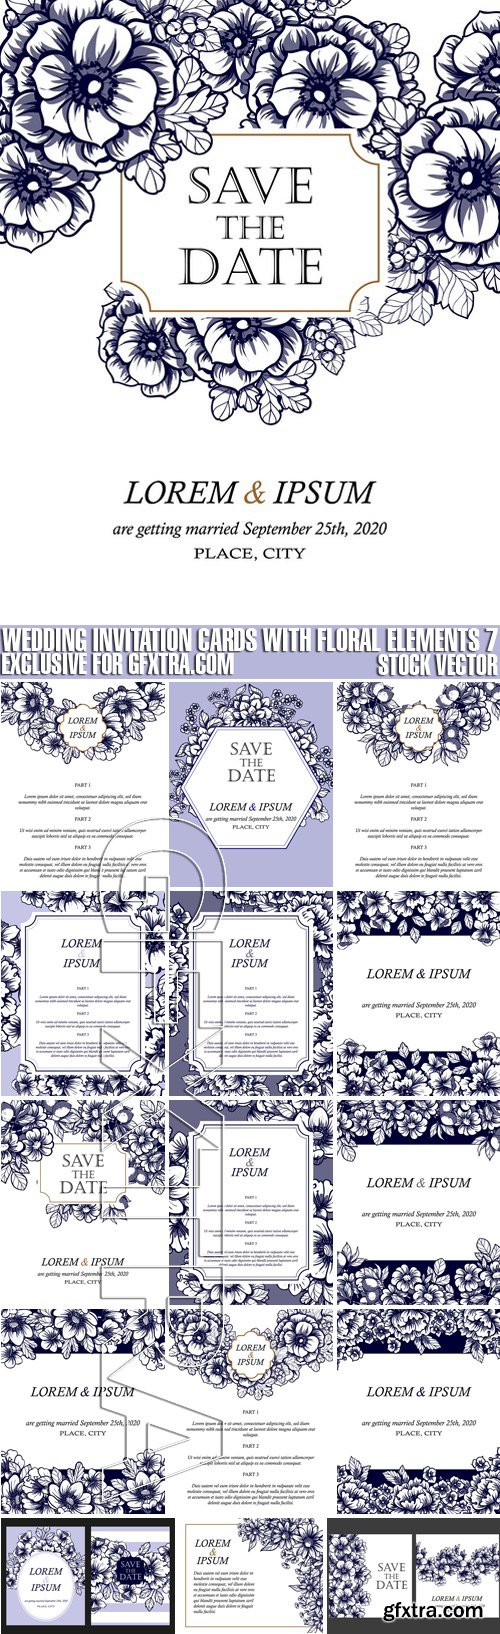 Stock Vectors - Wedding Invitation Cards With Floral Elements 7